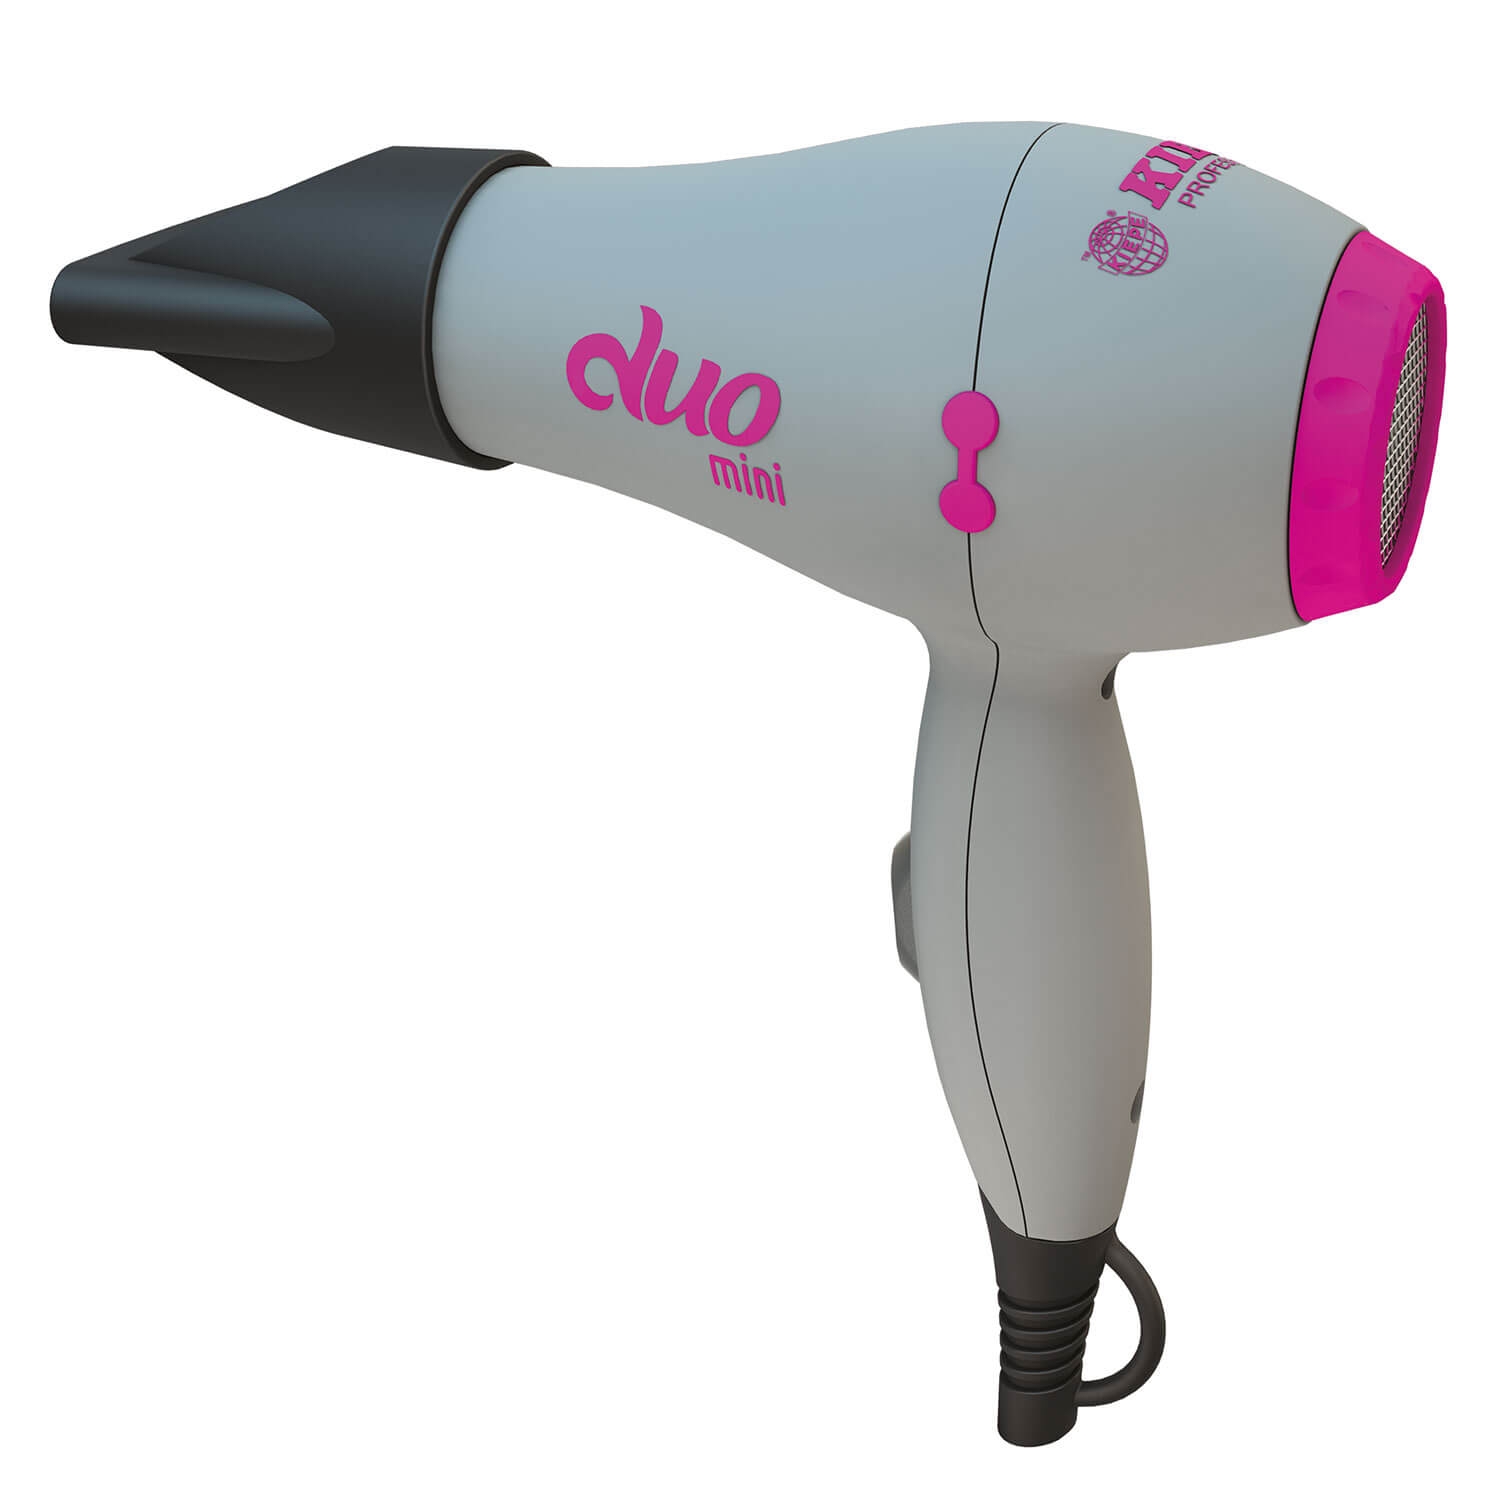 Product image from Kiepe - duo mini travel hairdryer Grey/Pink